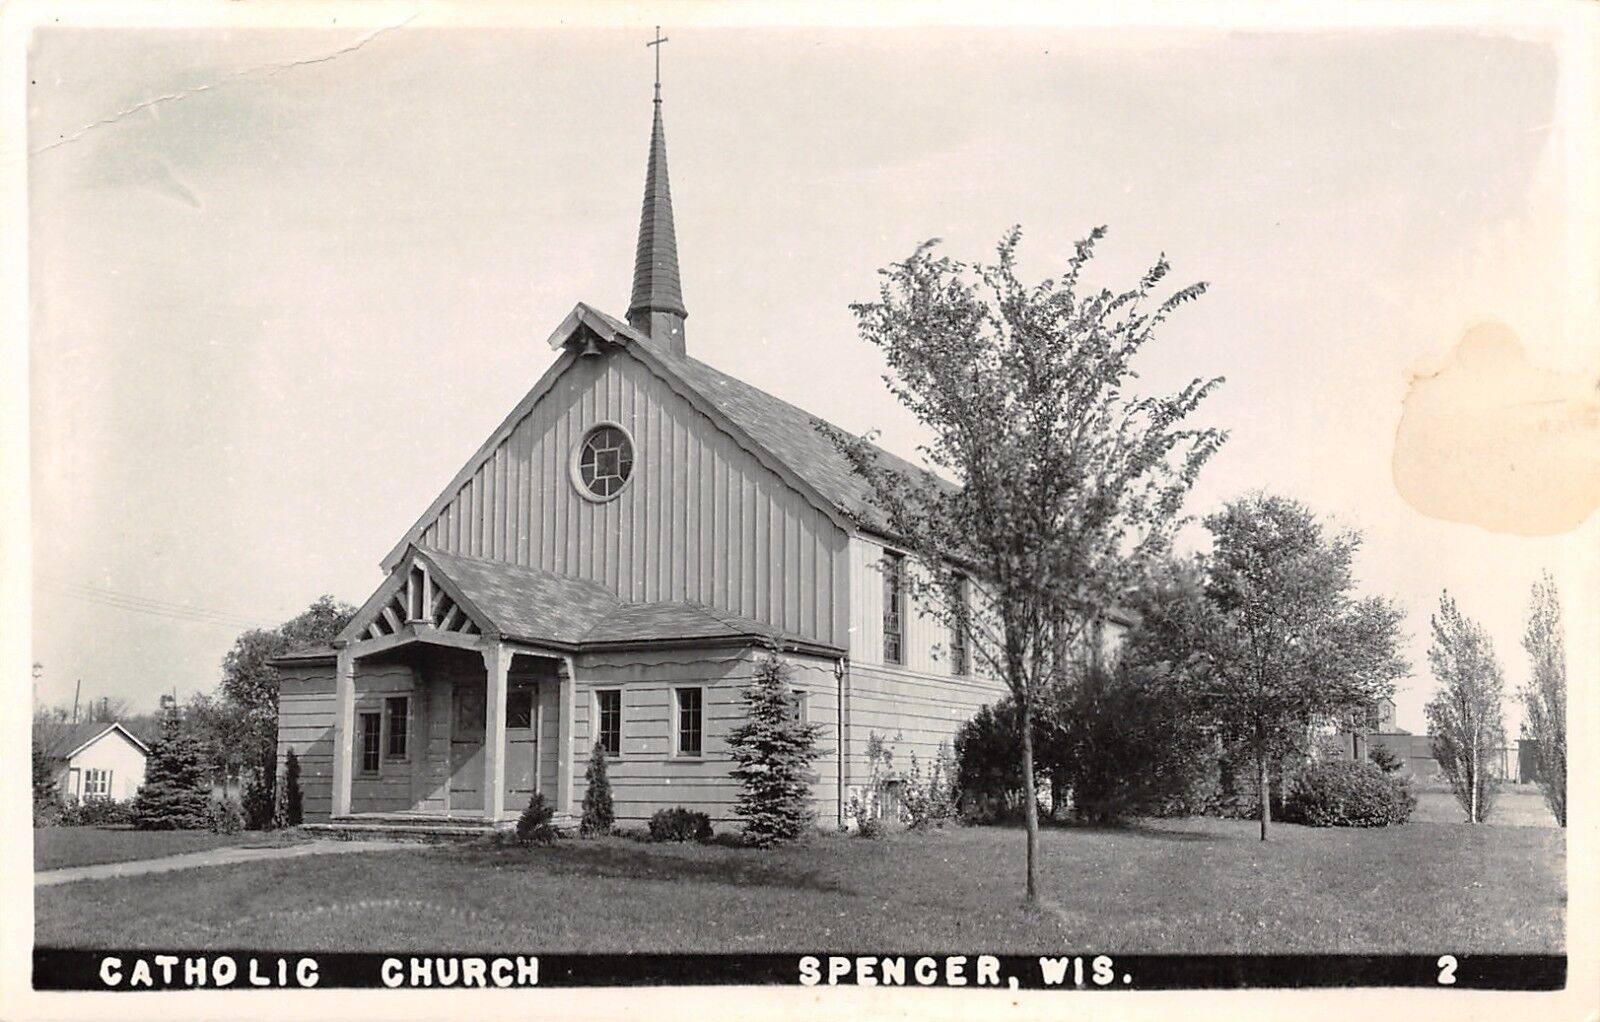 Spencer WI Vergeboard on Catholic Church~Newer Trees~Vertical Siding RPPC 1940s